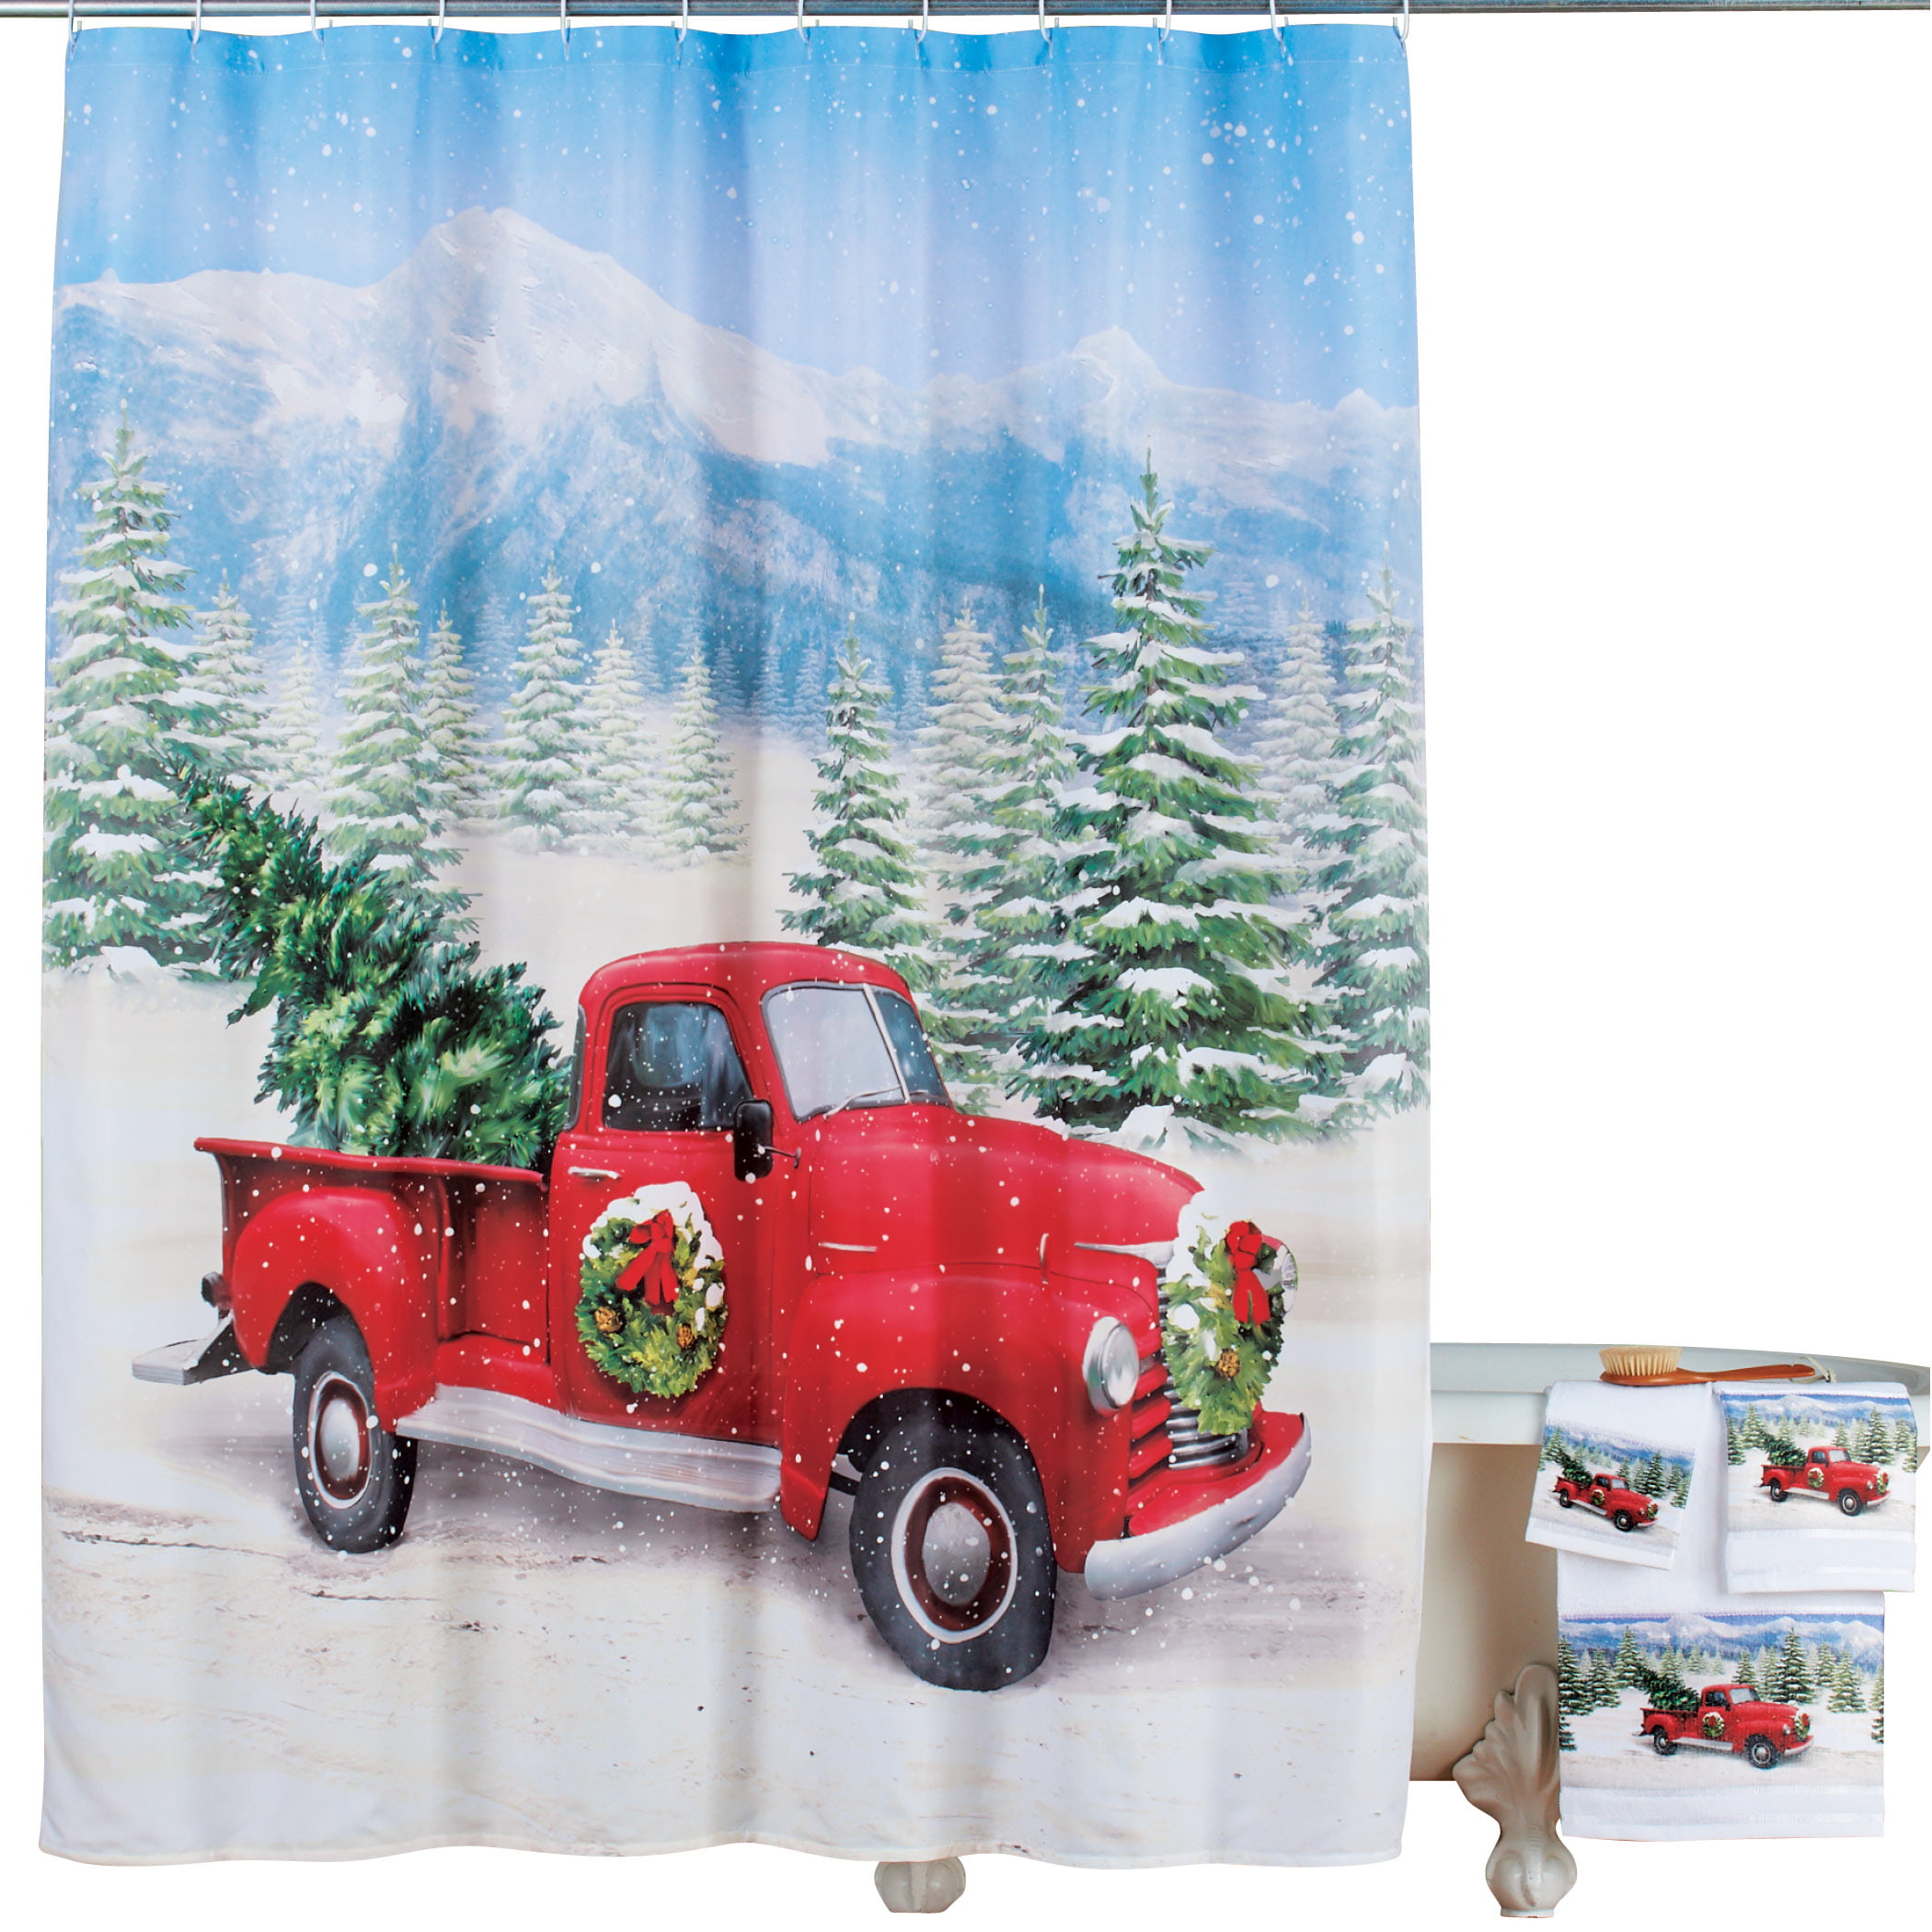 CHRISTMAS FABRIC SHOWER CURTAIN 13 Piece Set VINTAGE RED TRUCK W/ CHRISTMAS TREE 